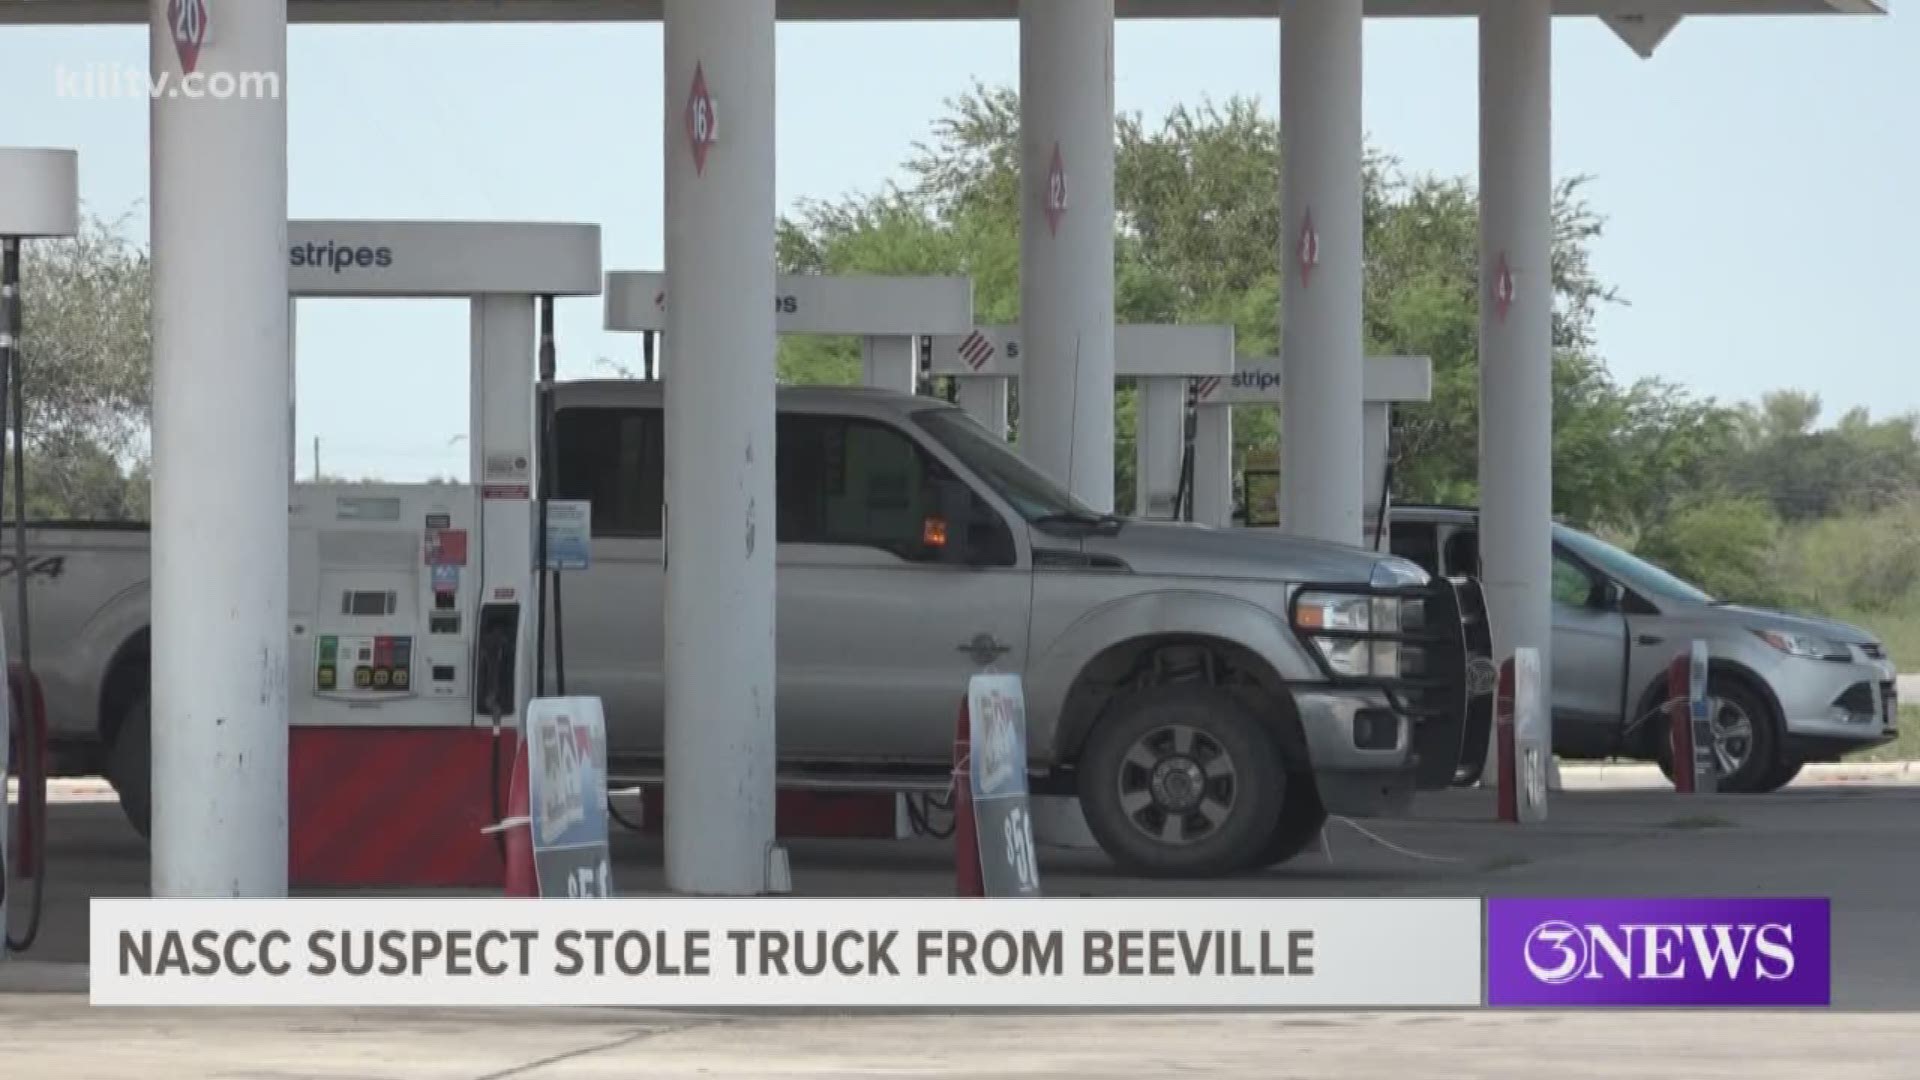 Beeville police pursued the driver and eventually called in assistance from the San Patricio County Sheriff's Office and Gregory police.